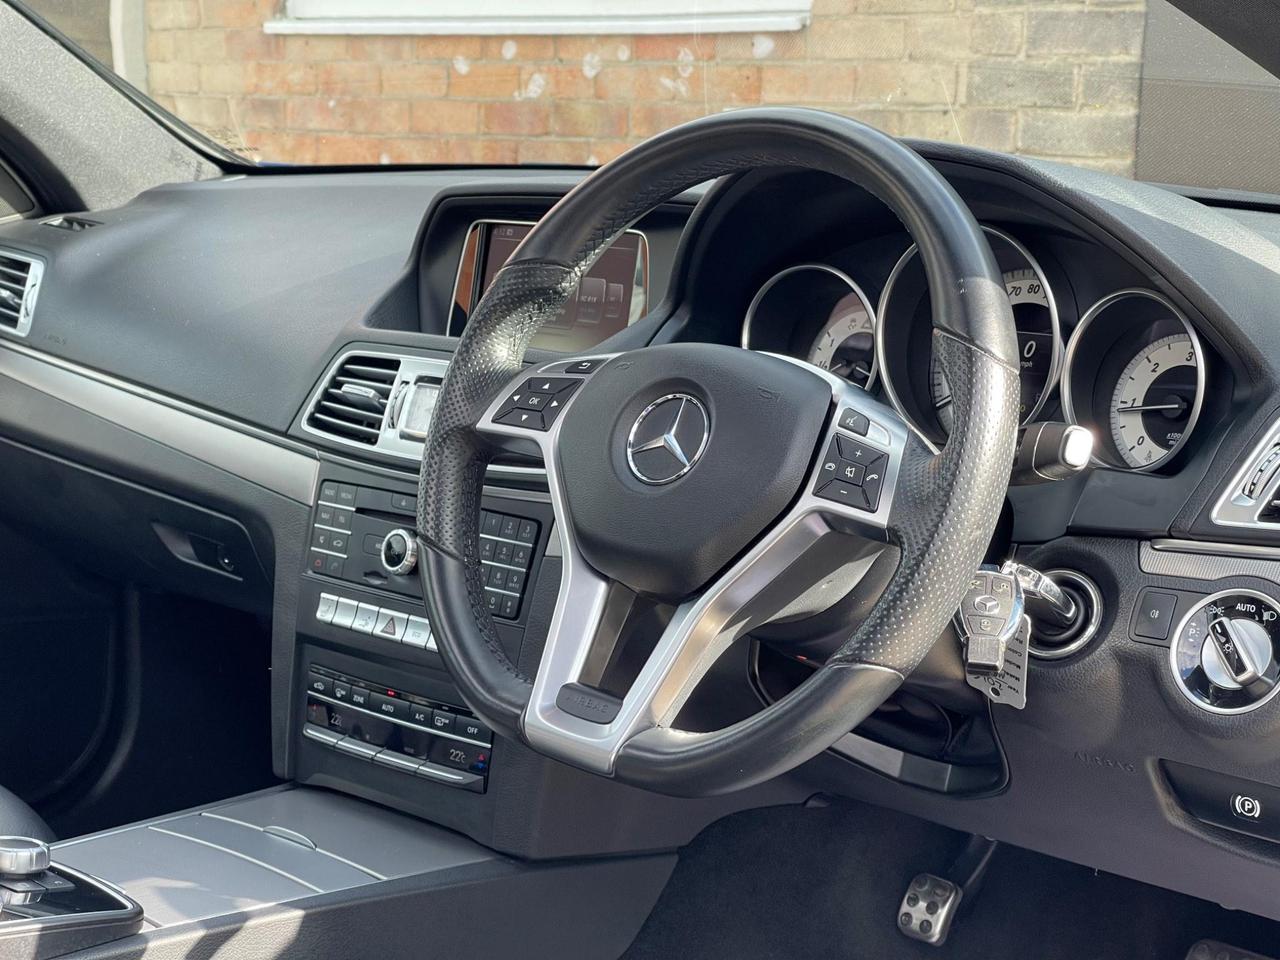 Used 2016 Mercedes-Benz E Class for sale in Sheffield